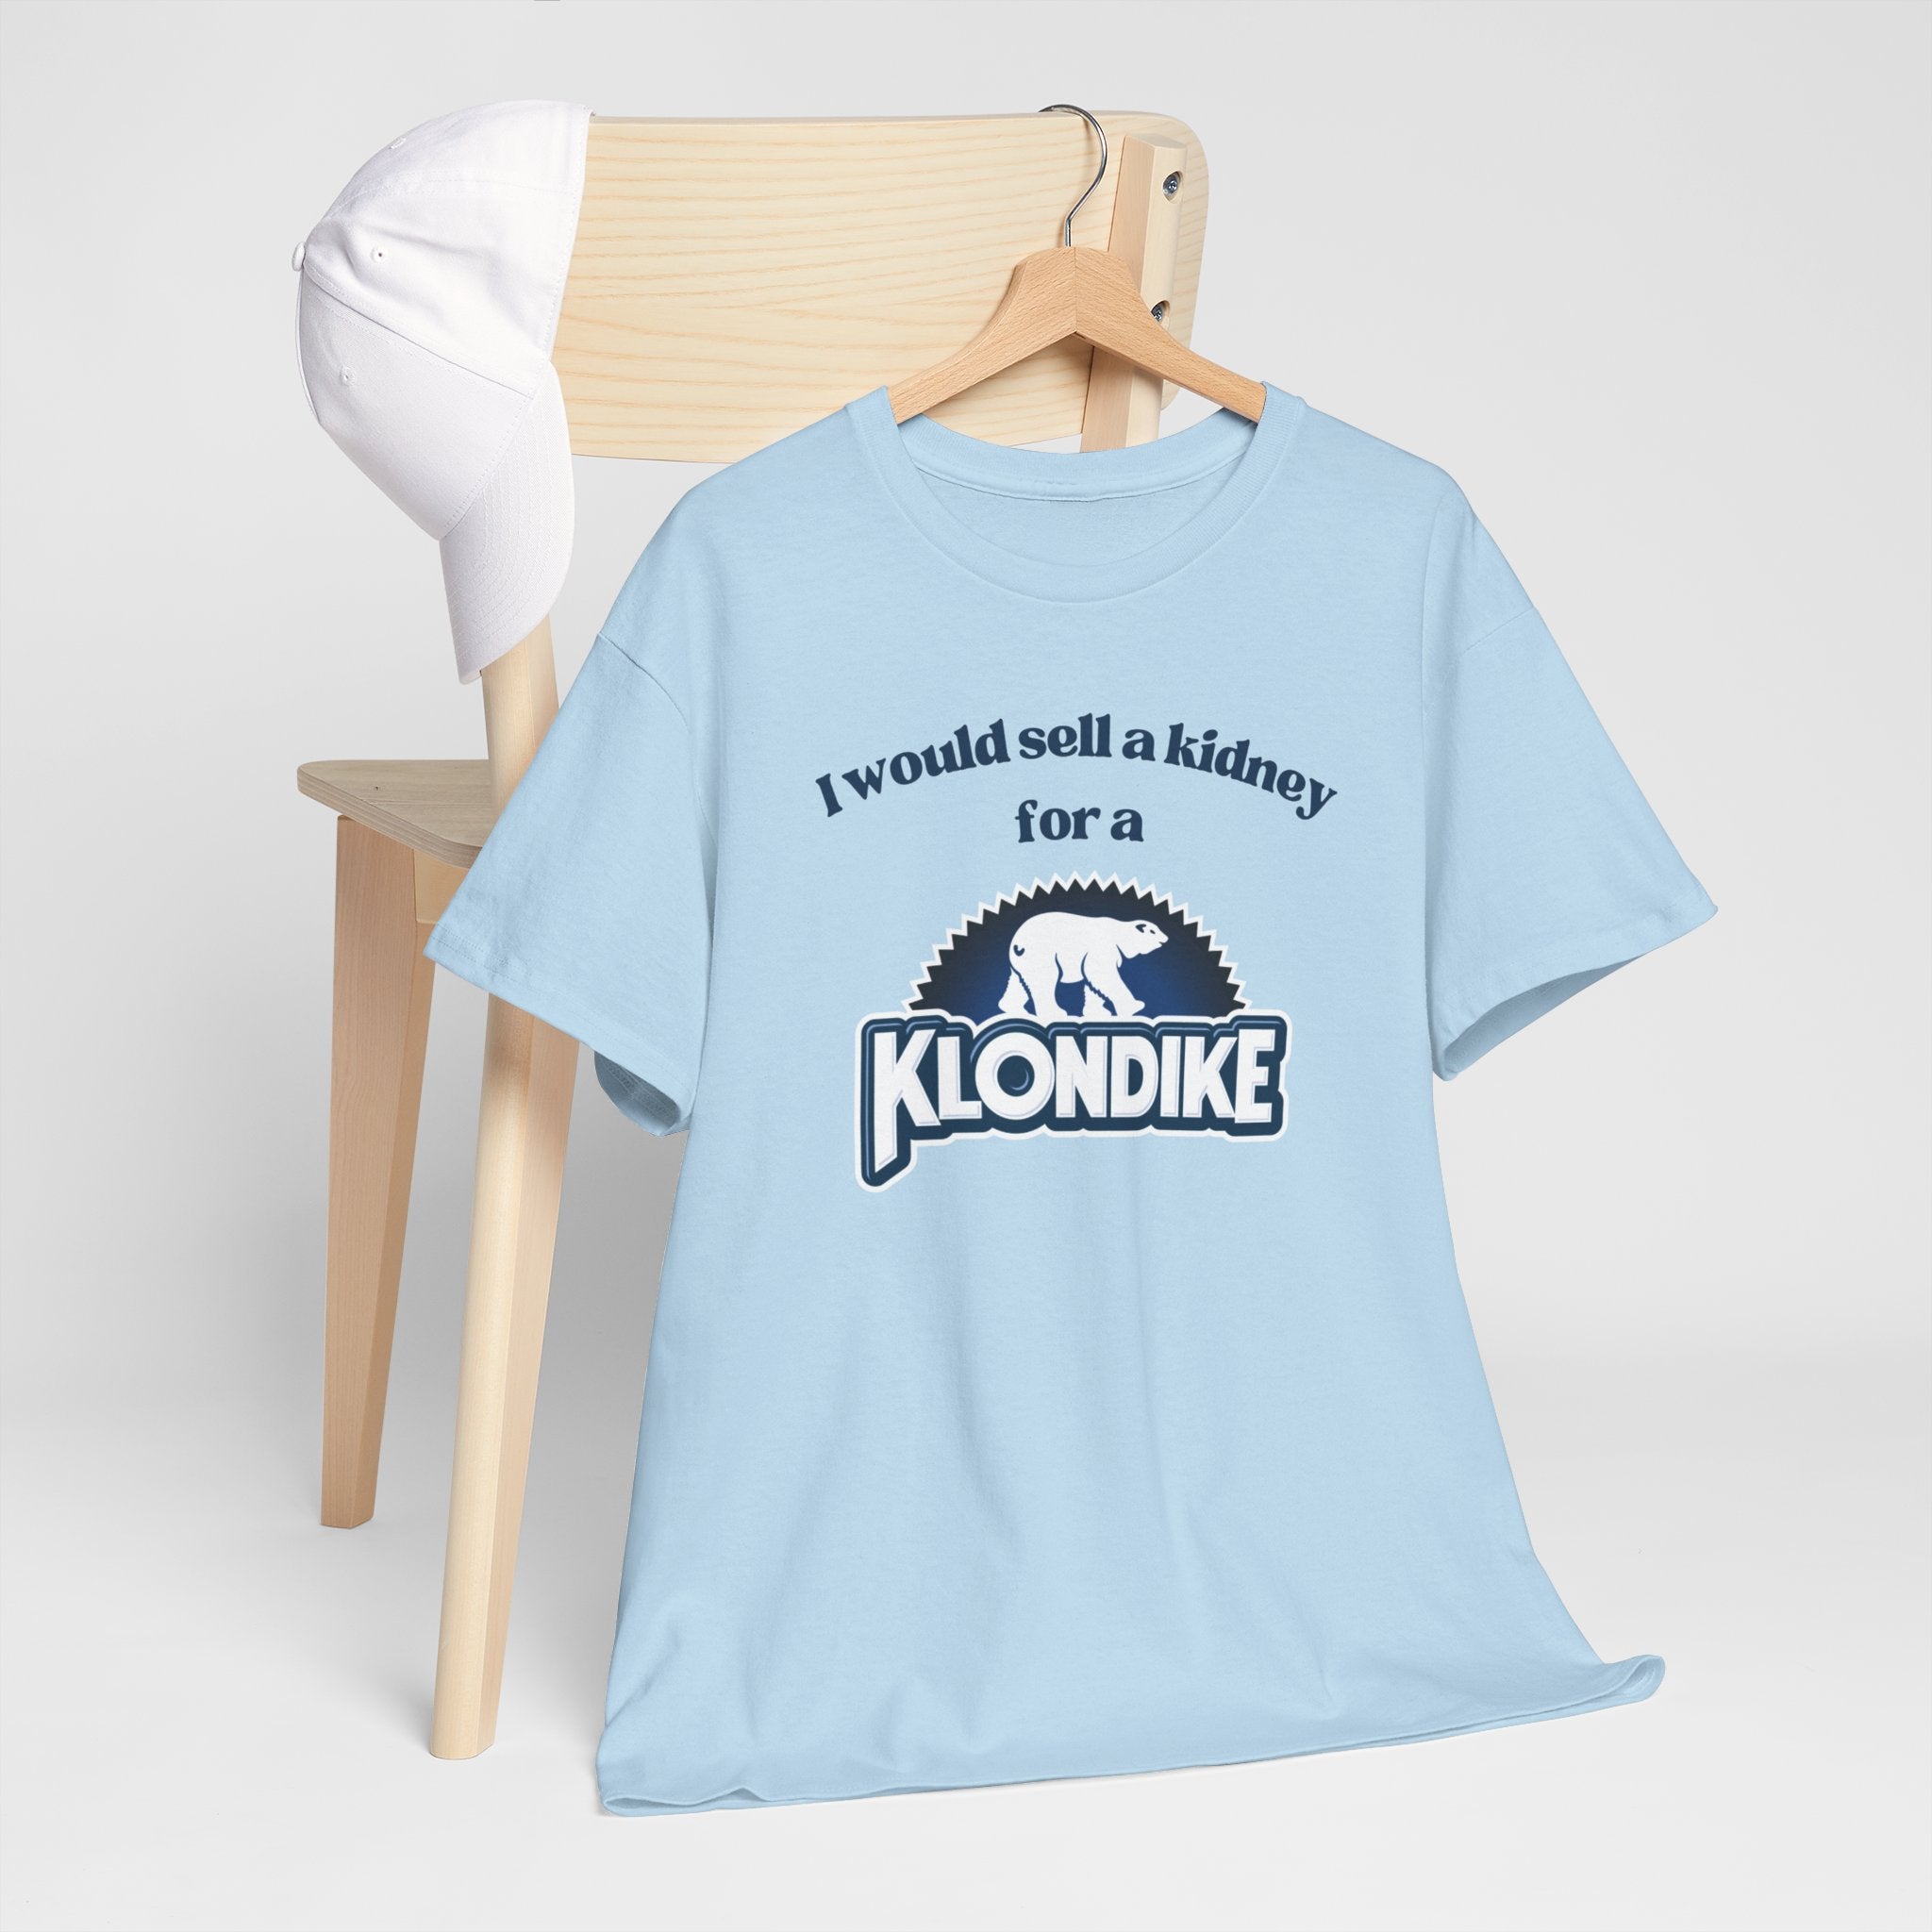 I Would Sell a Kidney for a Klondike Shirt